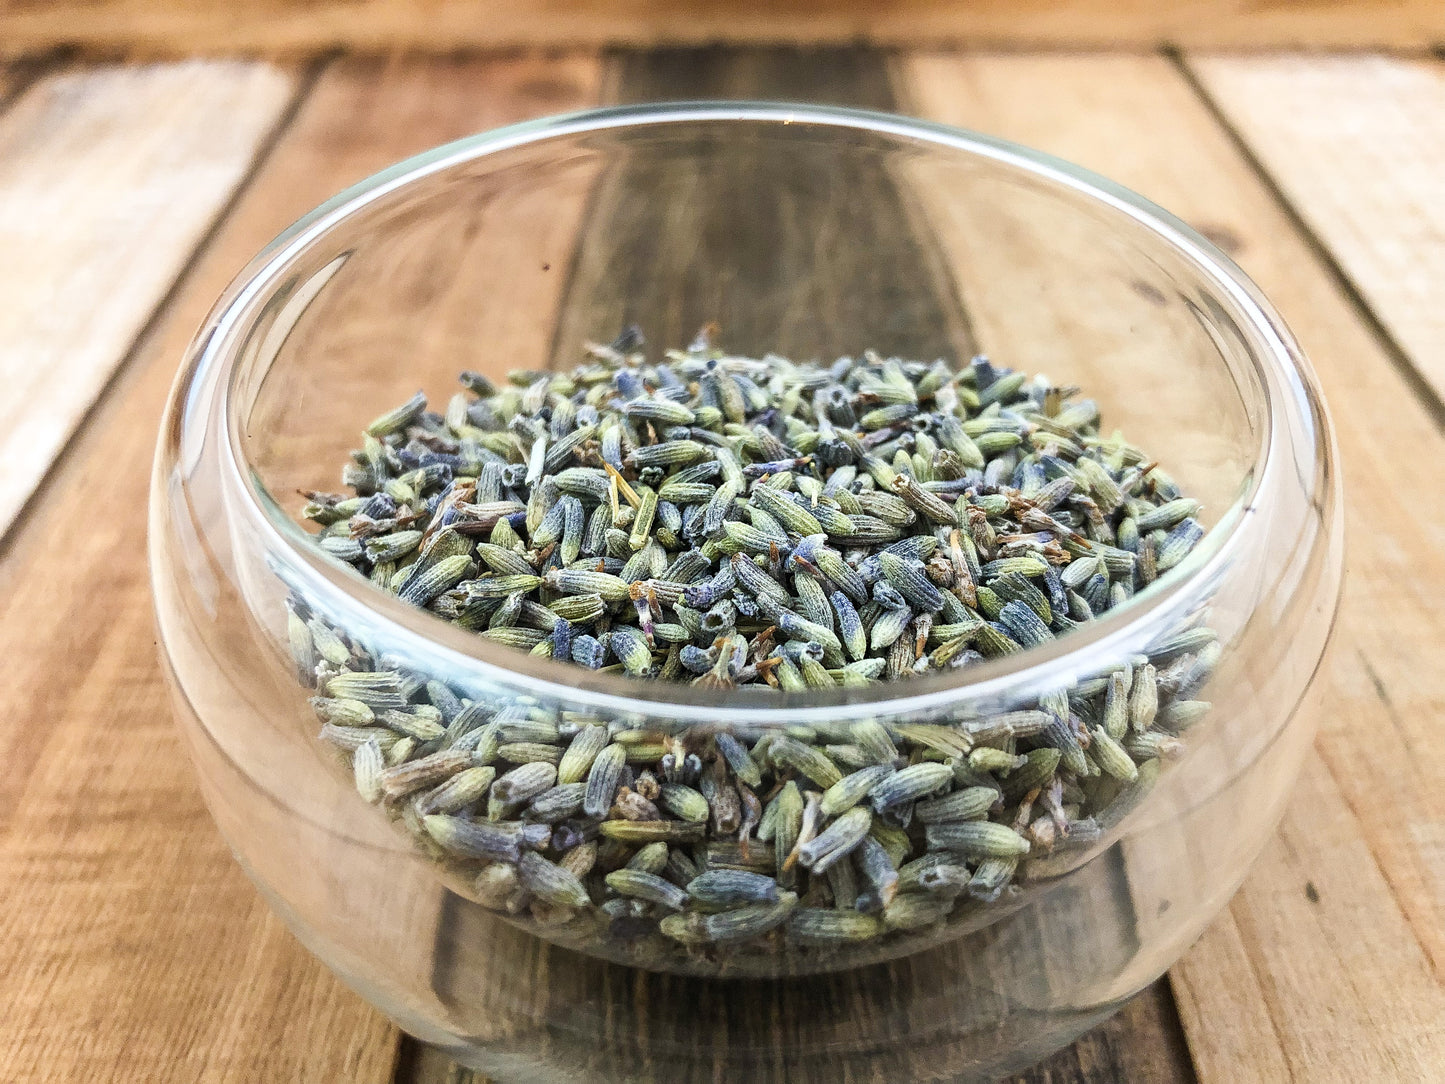 upclose image of dried lavender in a clear glass cup on a wooden table as background